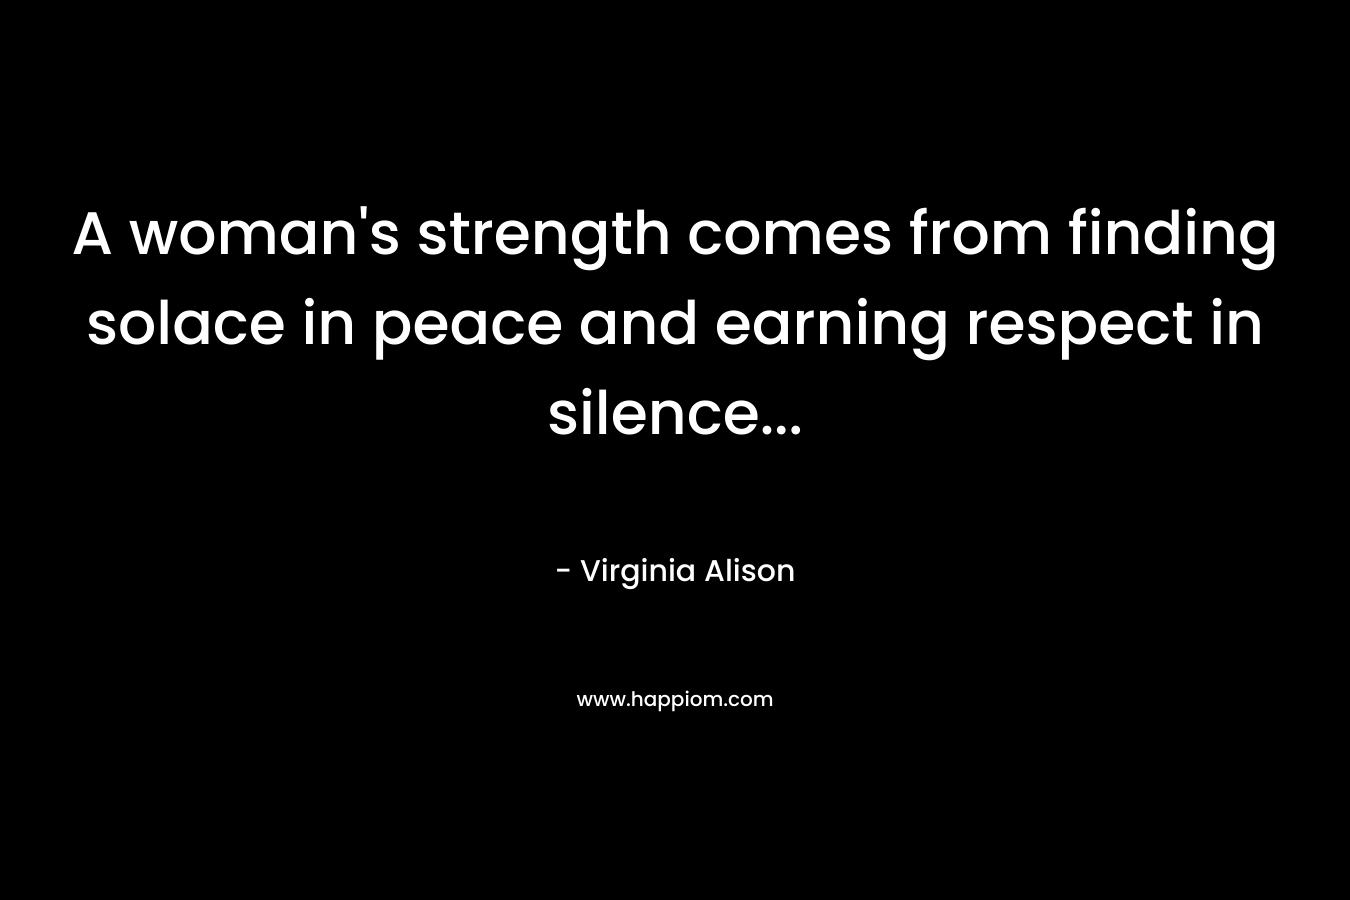 A woman's strength comes from finding solace in peace and earning respect in silence...